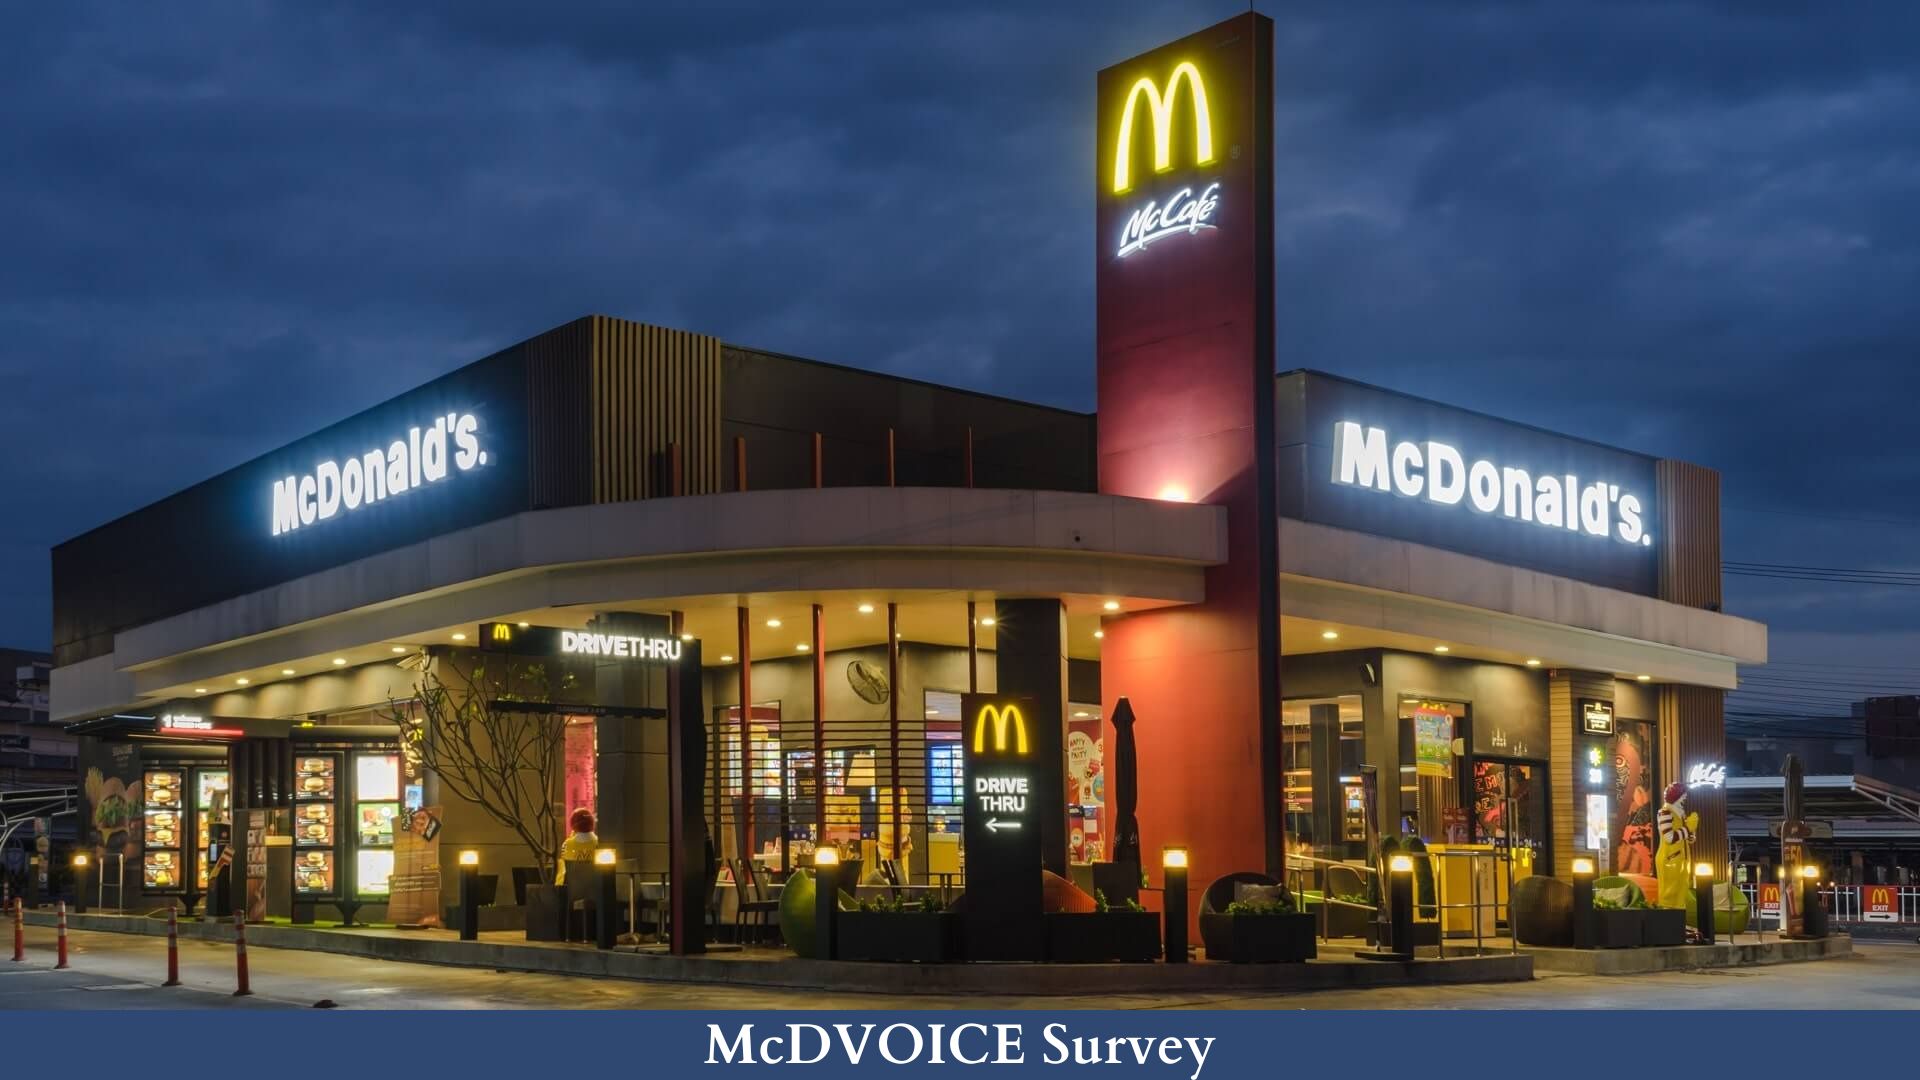 McDVOICE - Get Free Meal Coupon Code - McDonalds Survey